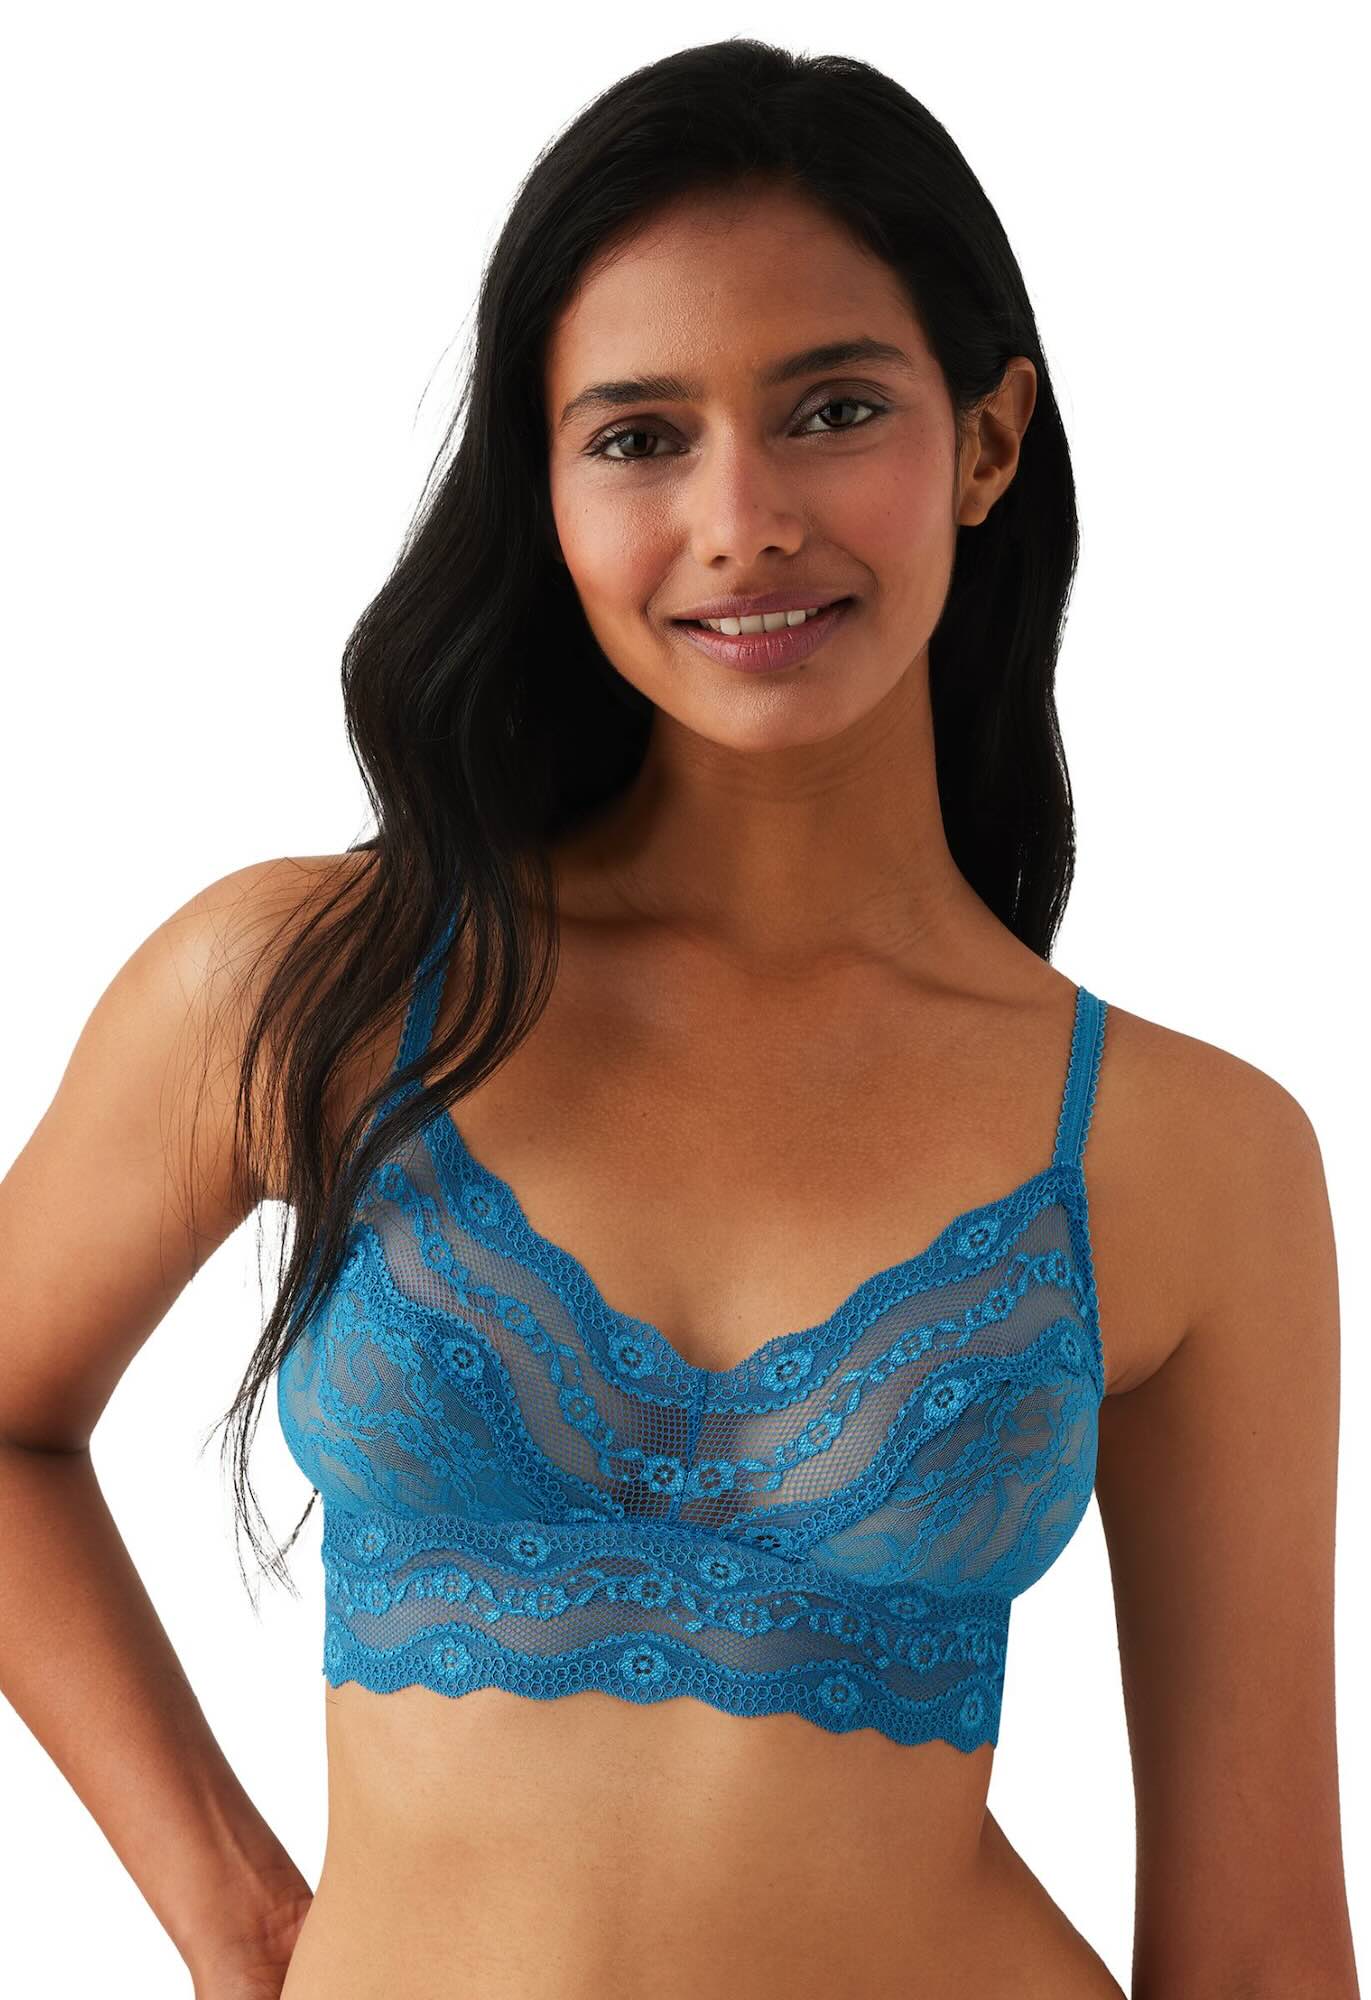 Lace Kiss bralette - new spring color